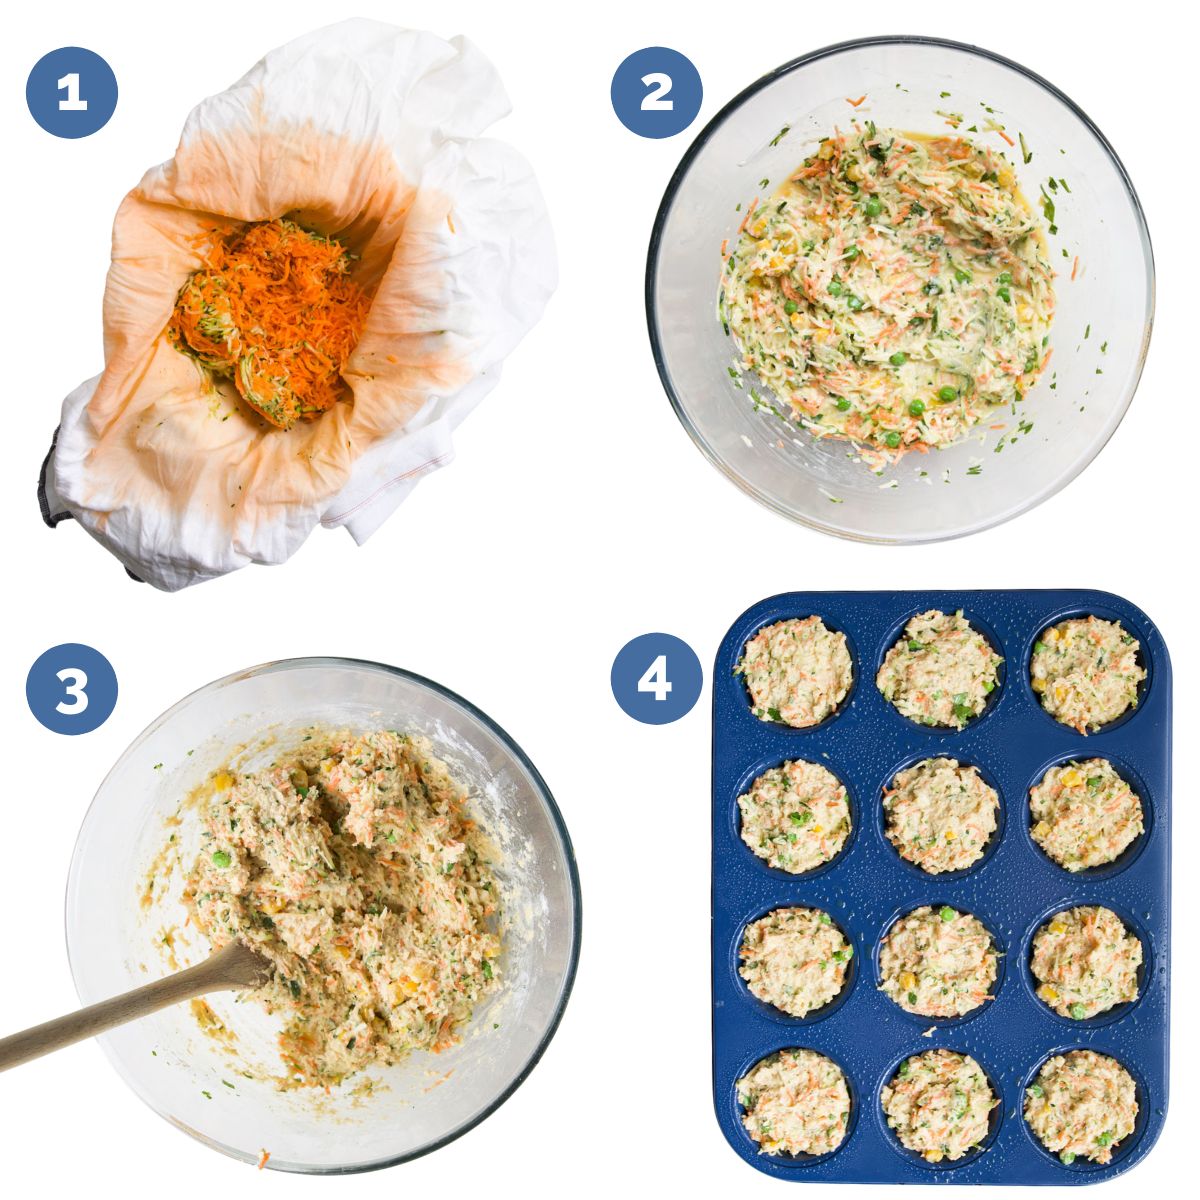 Collage of 4 Images Showing the Process Steps for Making Vegetable Muffins. 1) Liquid Squeezed out Veggies 2)Wet Ingredients in Bowl. 3)Wet and Dry Ingredients Mixed in Bowl 4) Raw Muffin Mixture in Muffin Tray. 